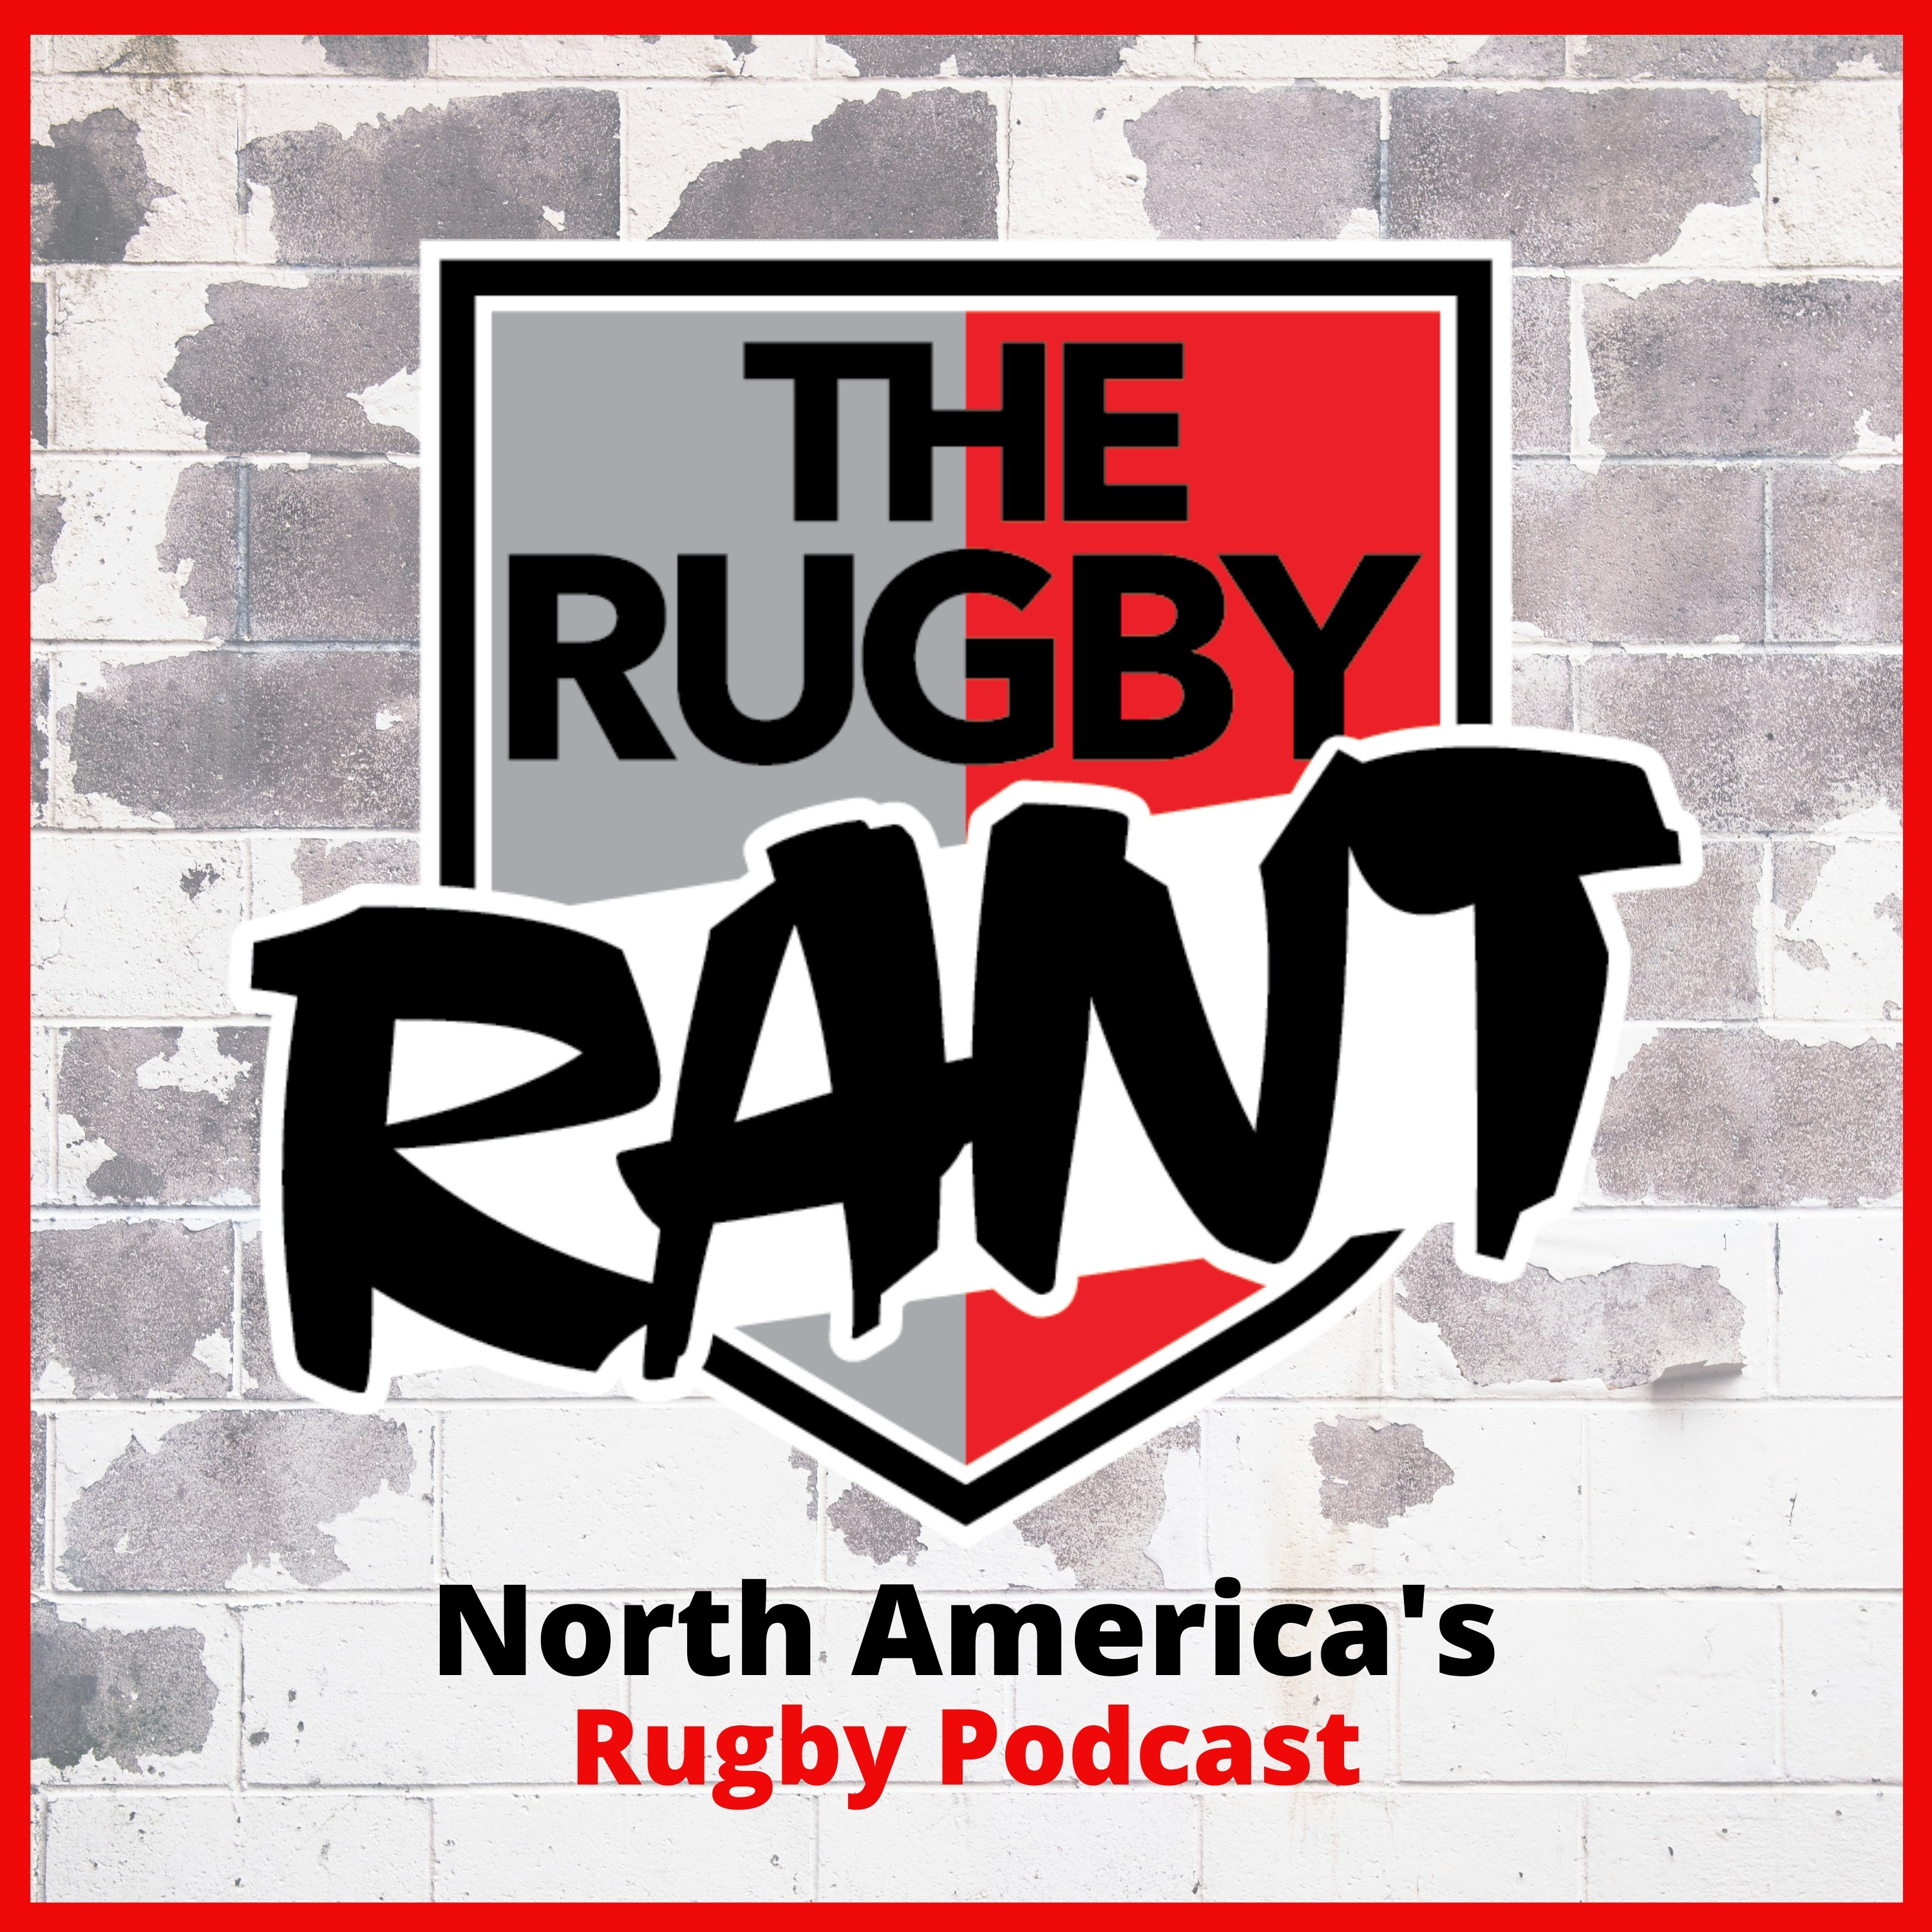 The Rugby Rant - Run, Pass or Kick with Scott Lawrence